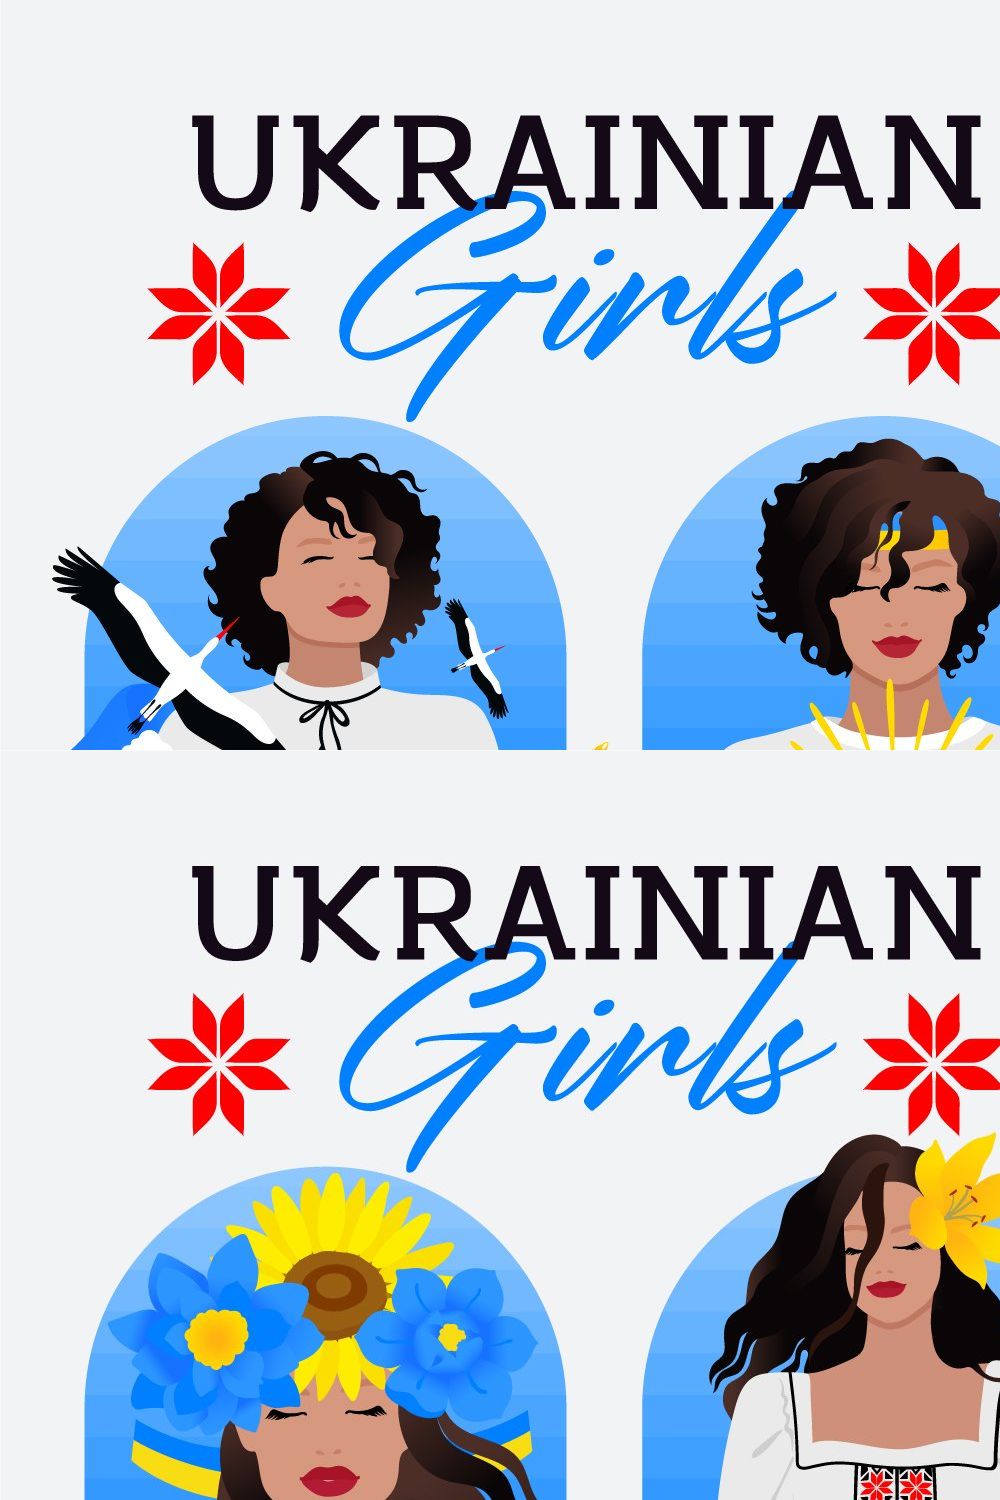 Ukrainian girls and woman clipart pinterest preview image.